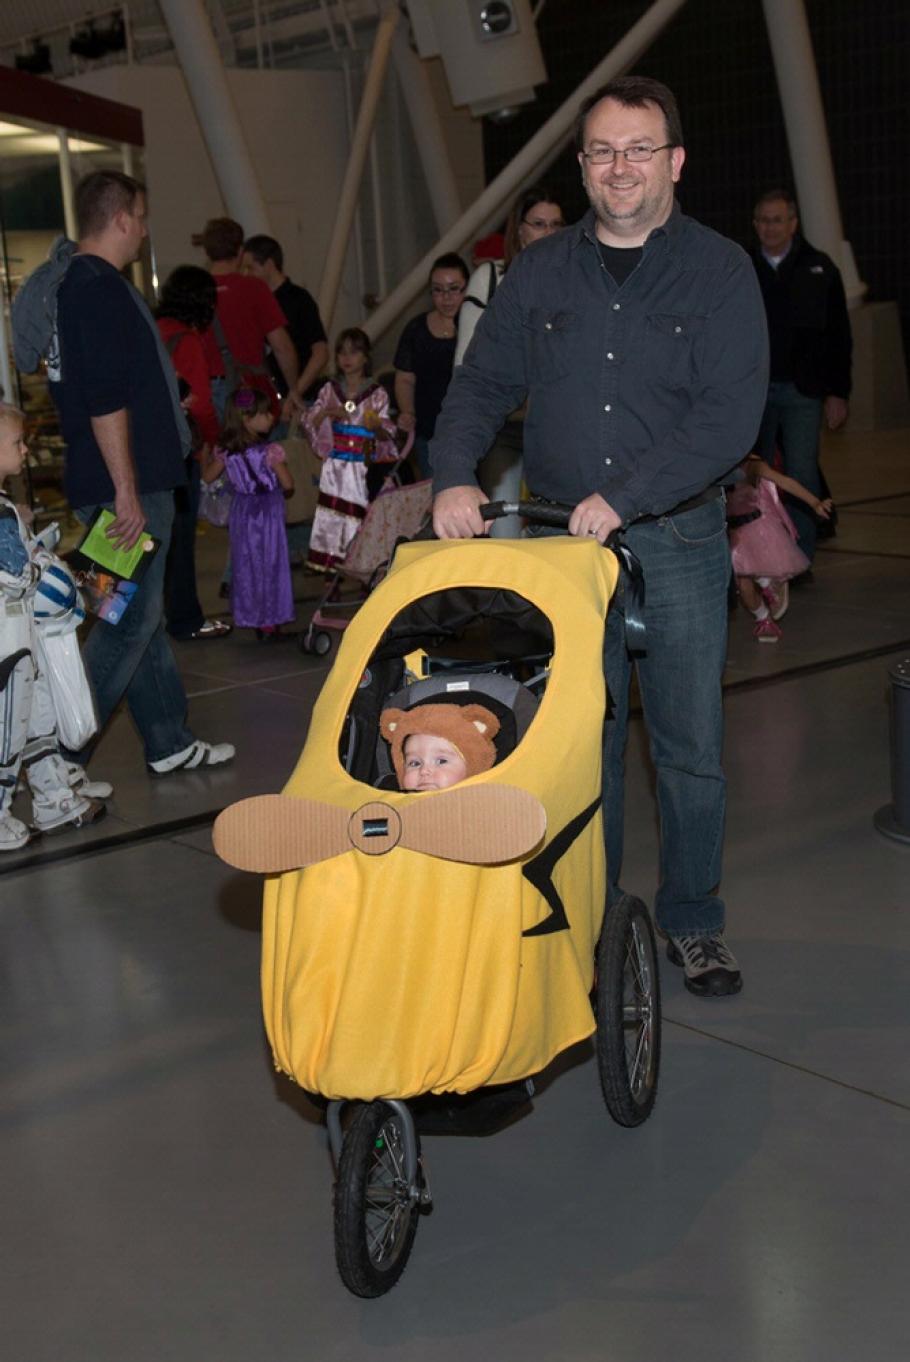 An infant is dressed up in a Piper Cub-inspired Halloween costume during the Museum's annual Halloween event.